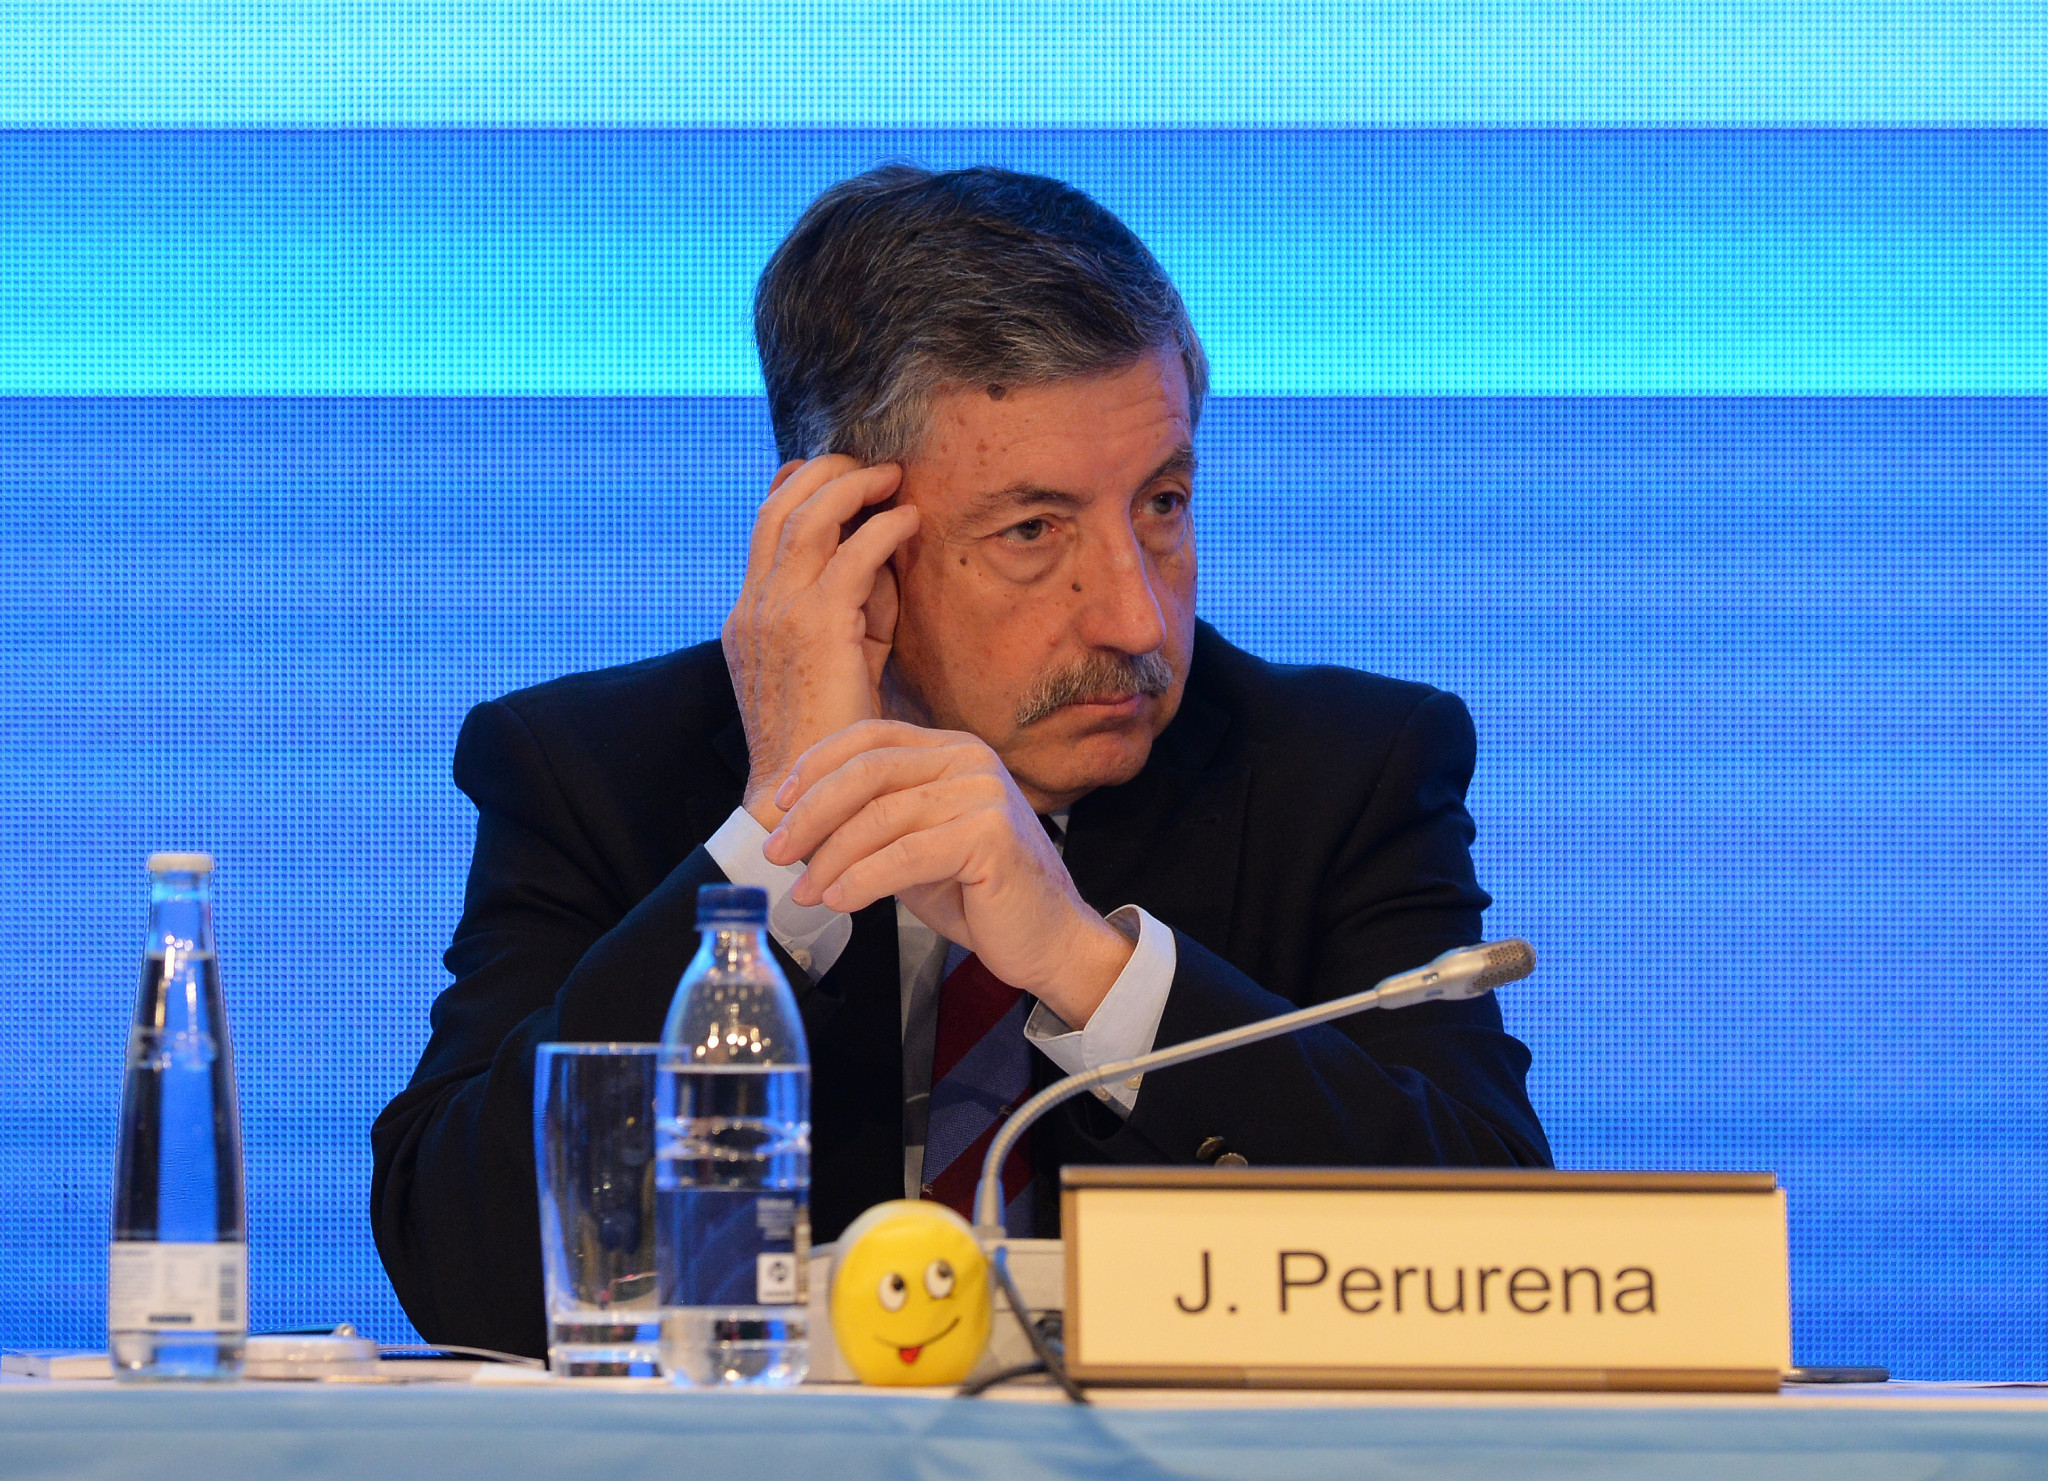 ICF poised to elect Perurena successor at Congress in Rome